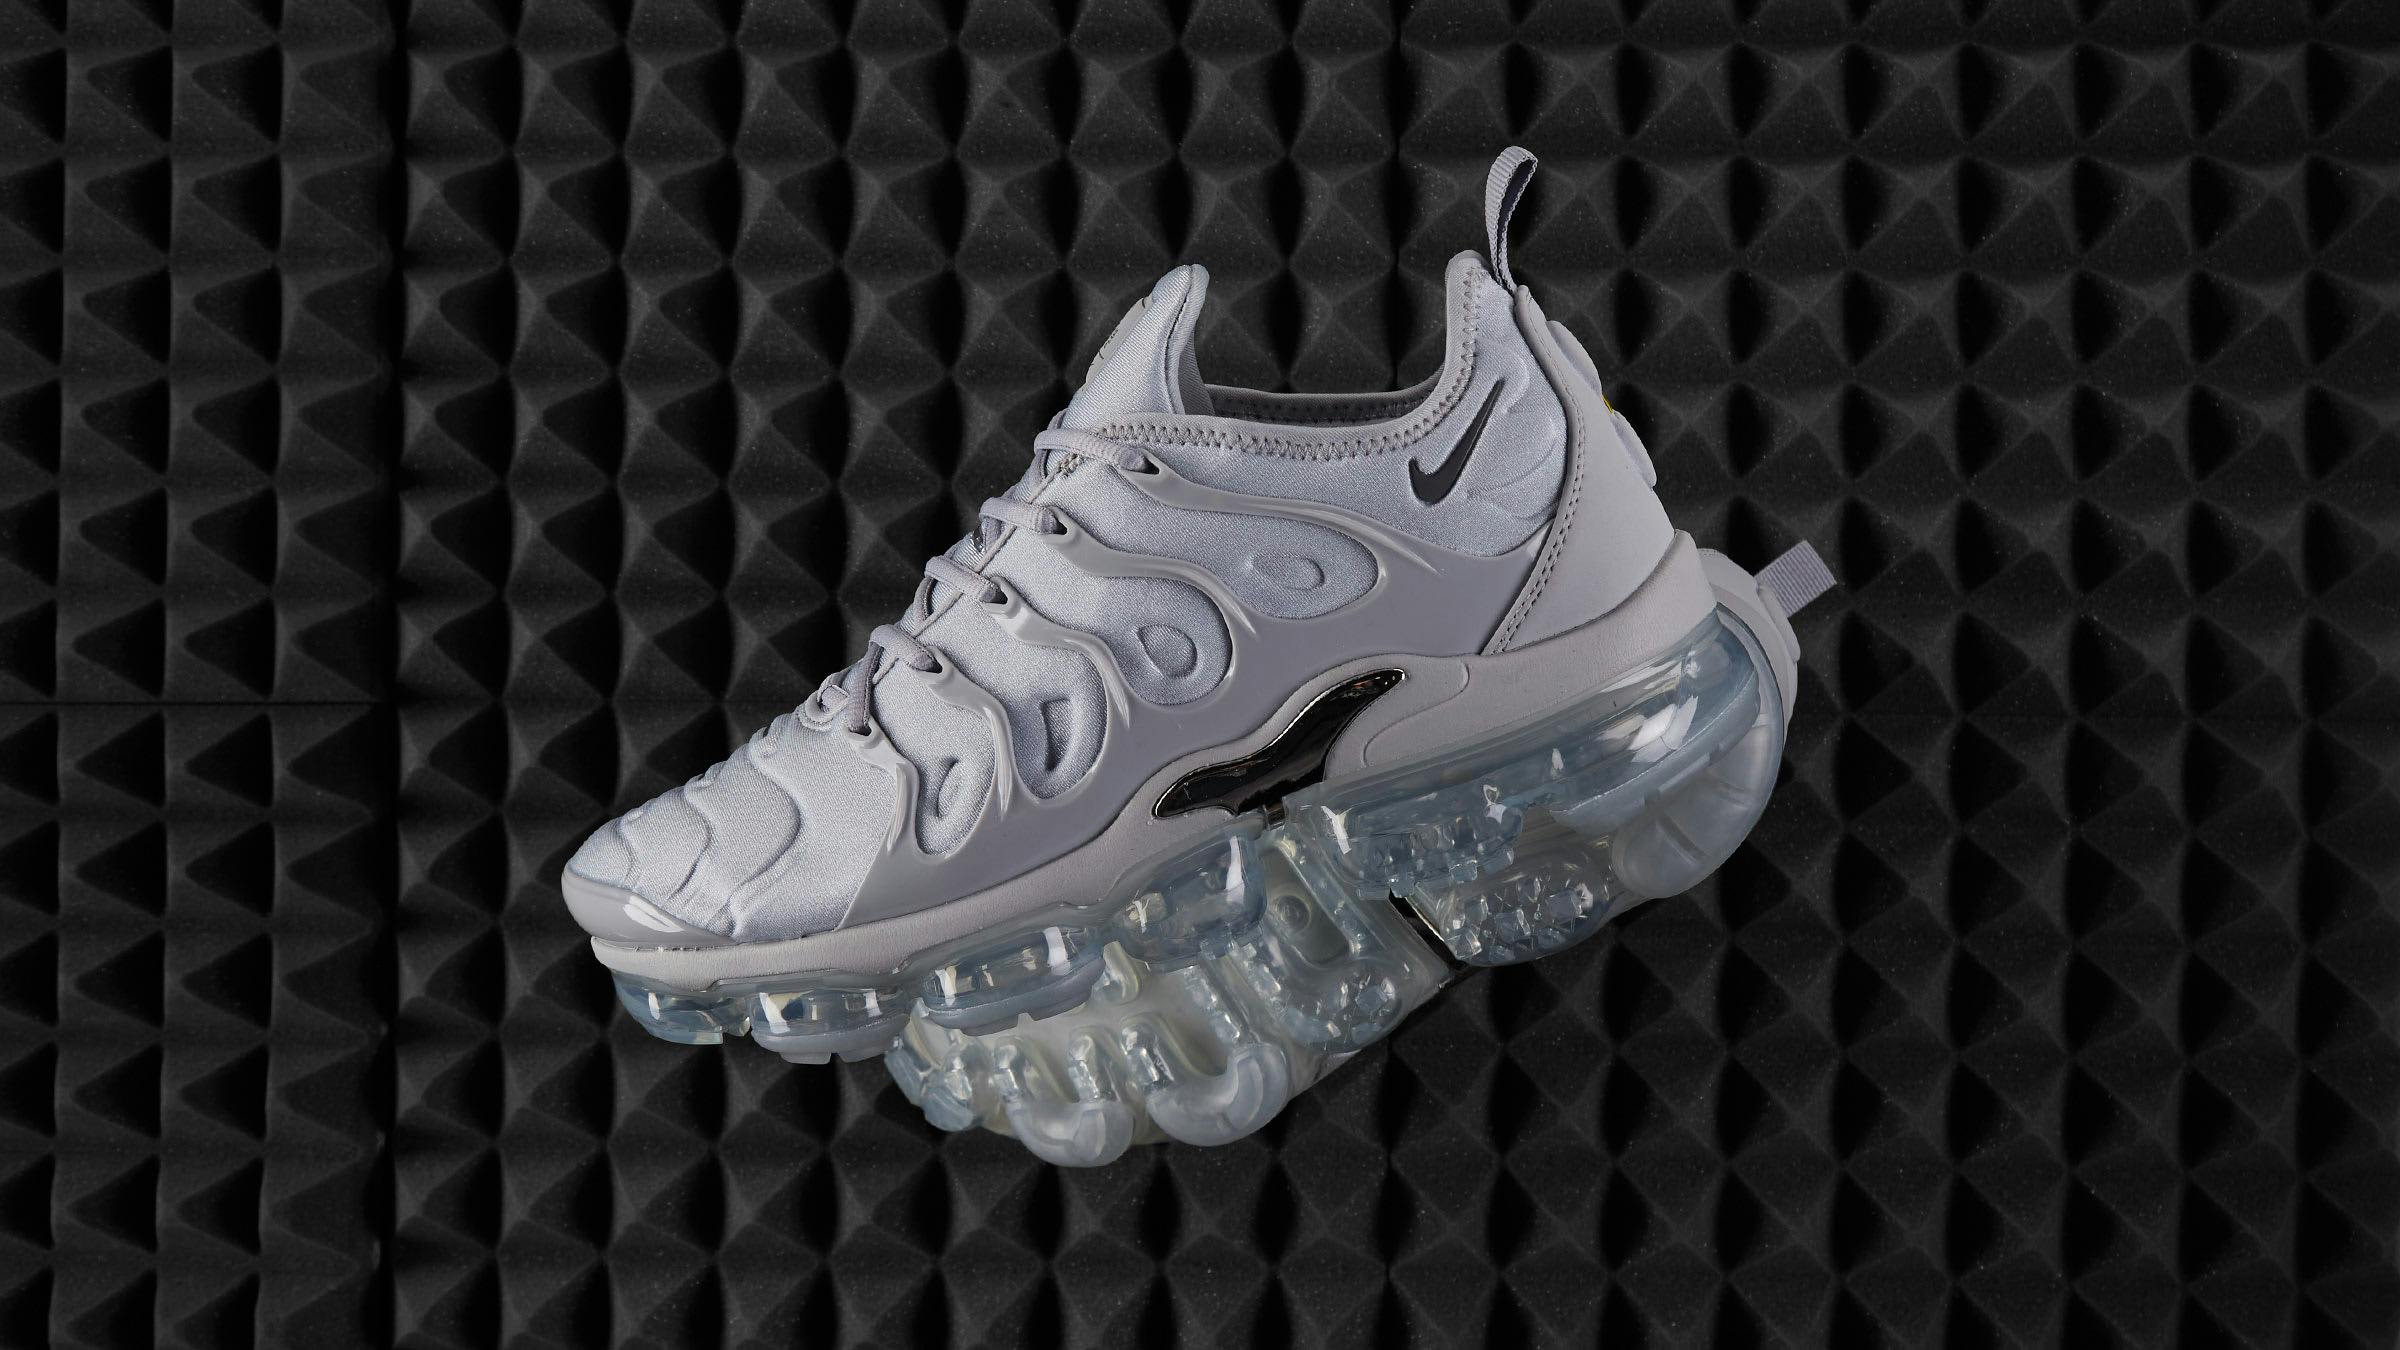 Etna dentista doce Nike Vapormax Plus 'Charcoal' - Register Now on END. (Global) Launches |  END. (Global)